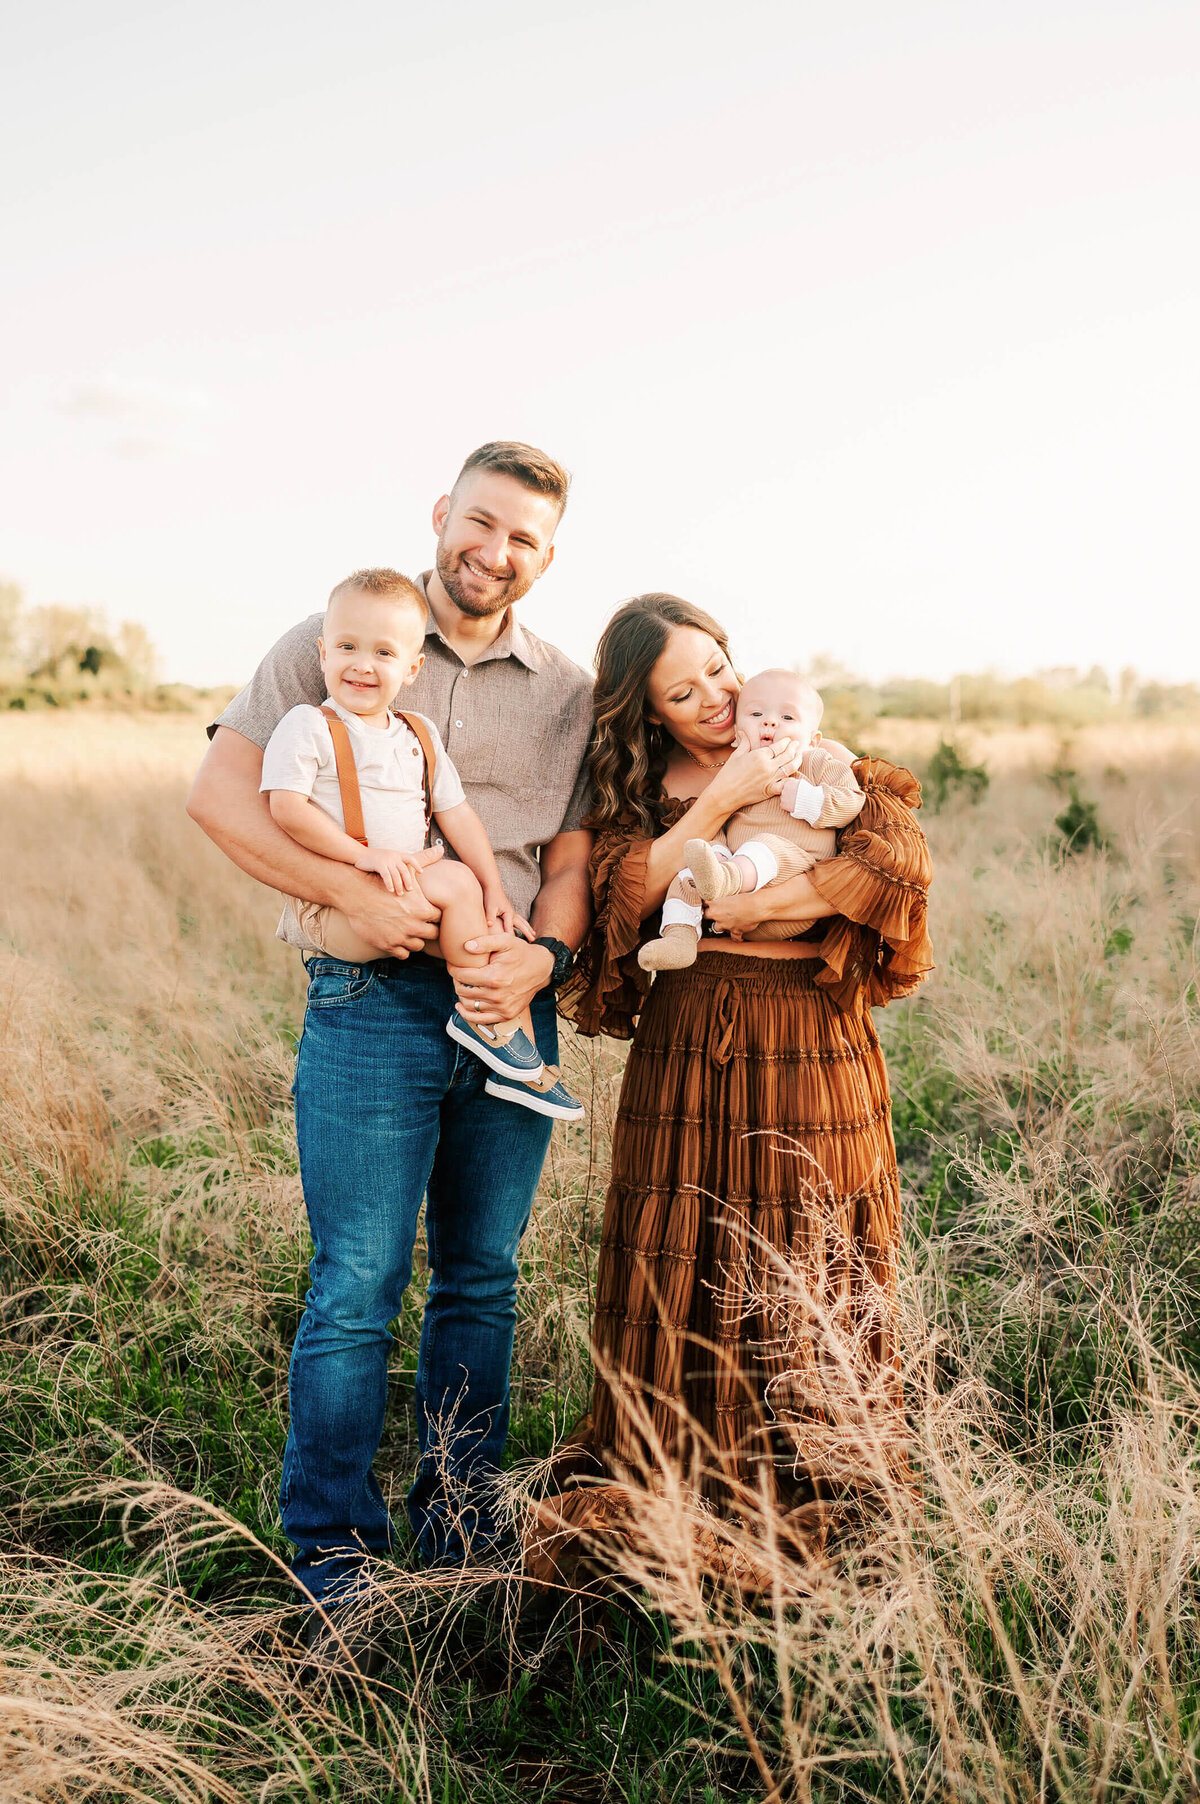 Springfield MO family photographer Jessica Kennedy of The XO Photography captures family cuddling in a field at sunset